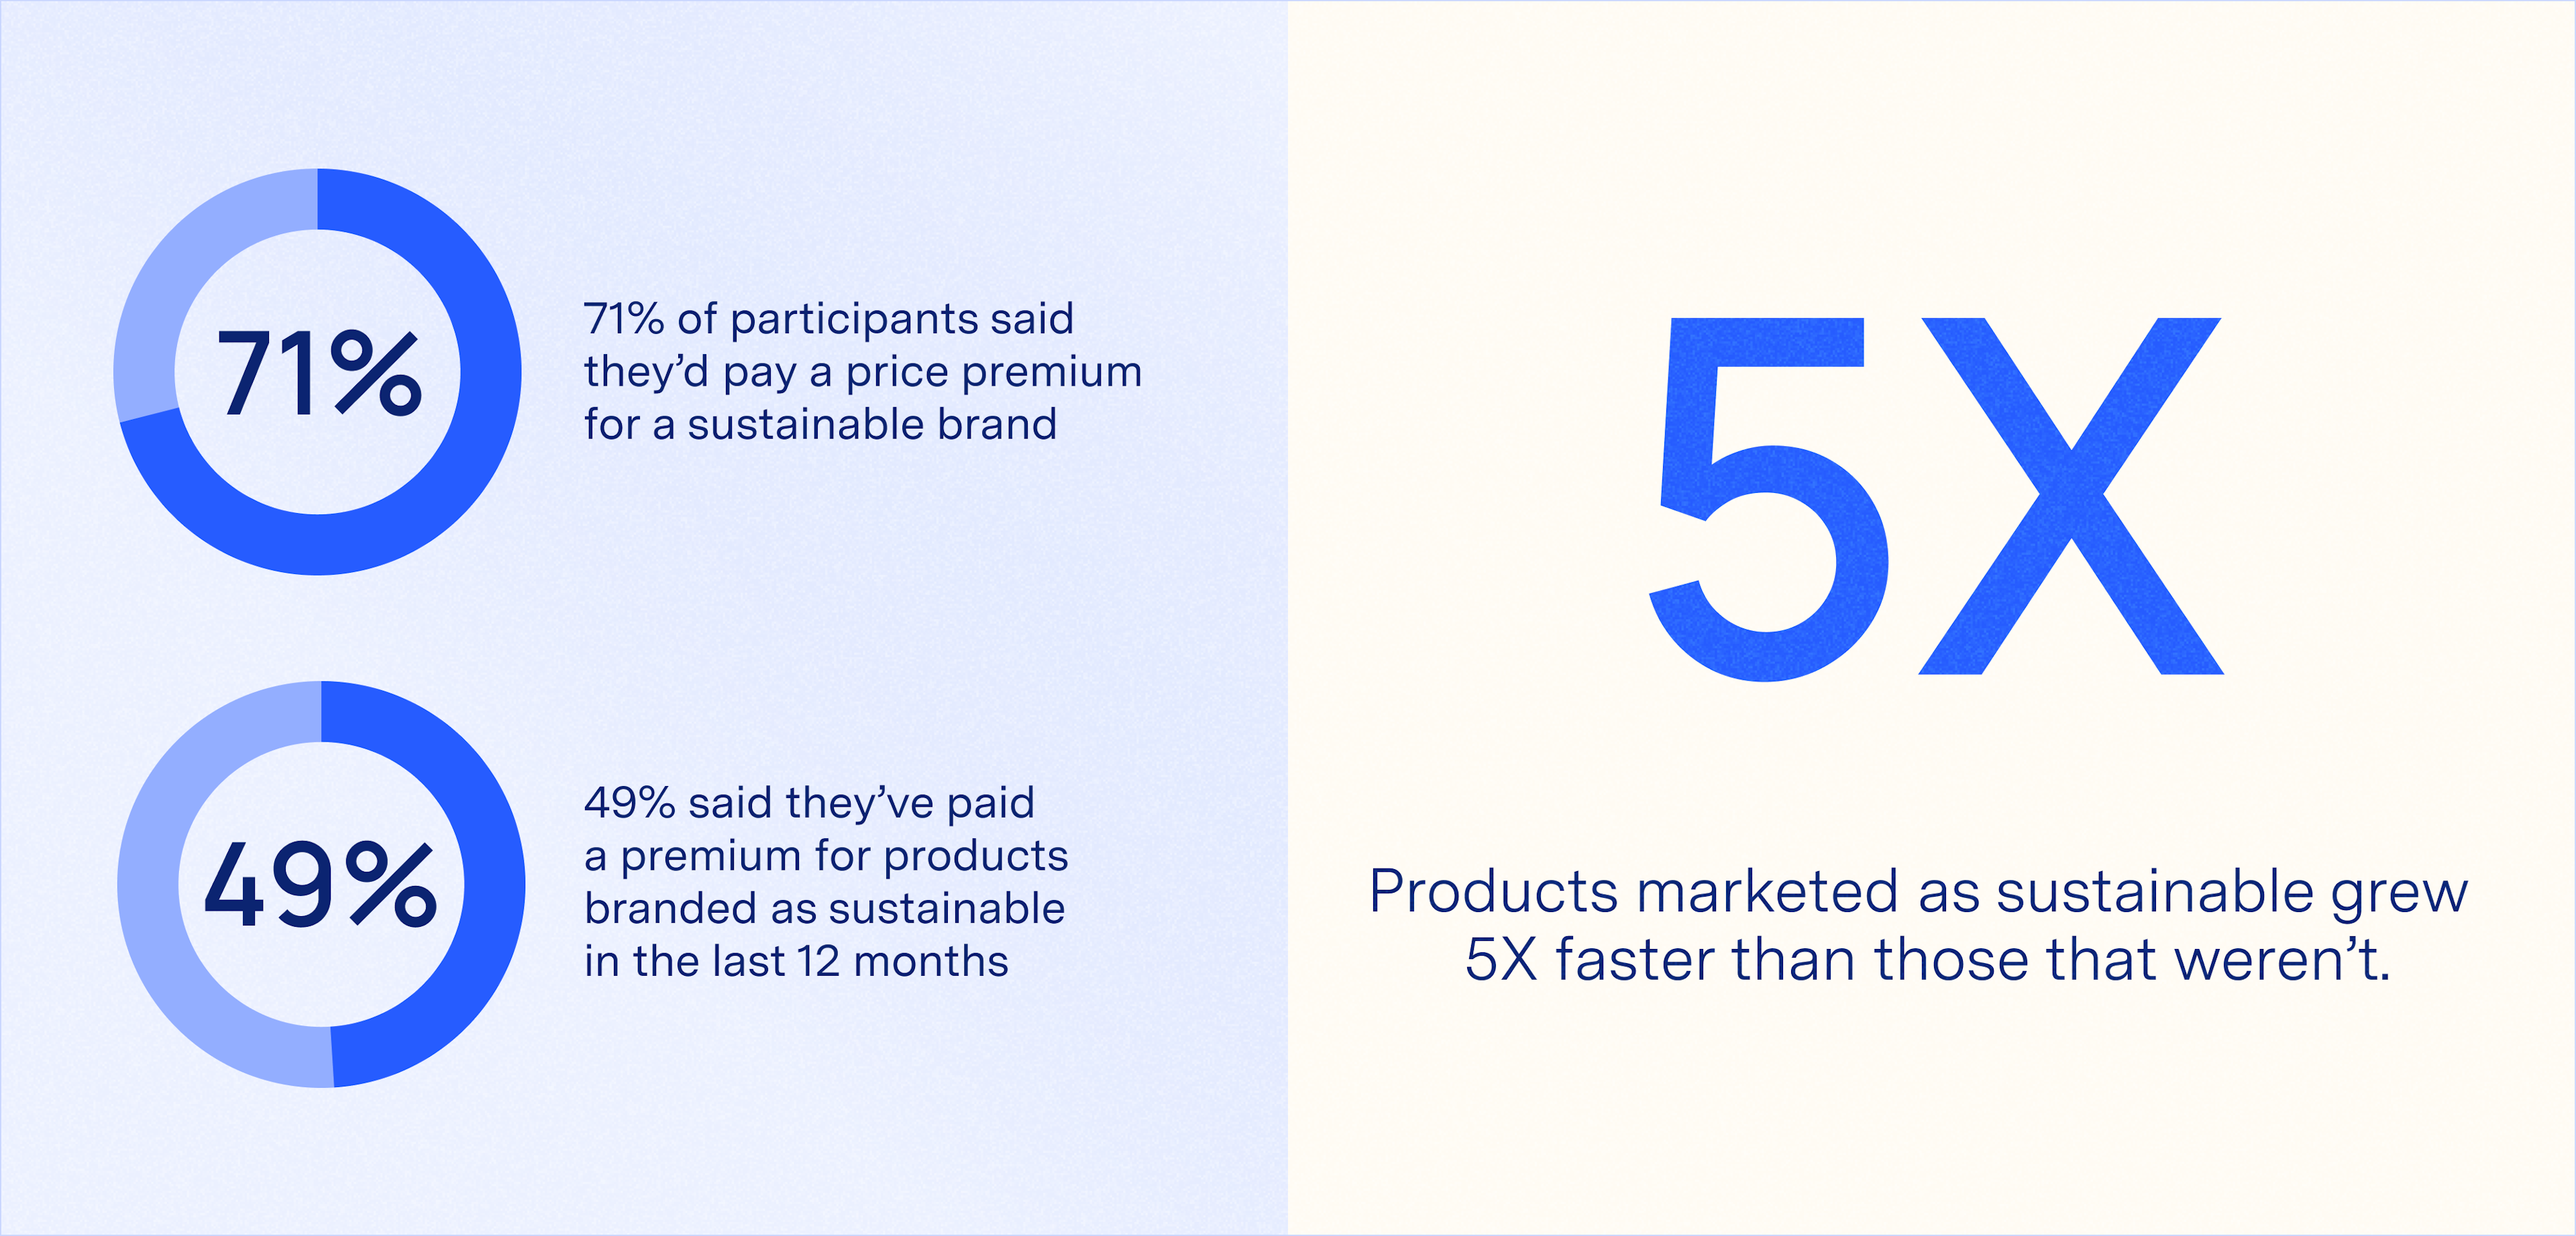 2020 consumer survey - Products marketed as sustainable grew 5x faster than those that weren't